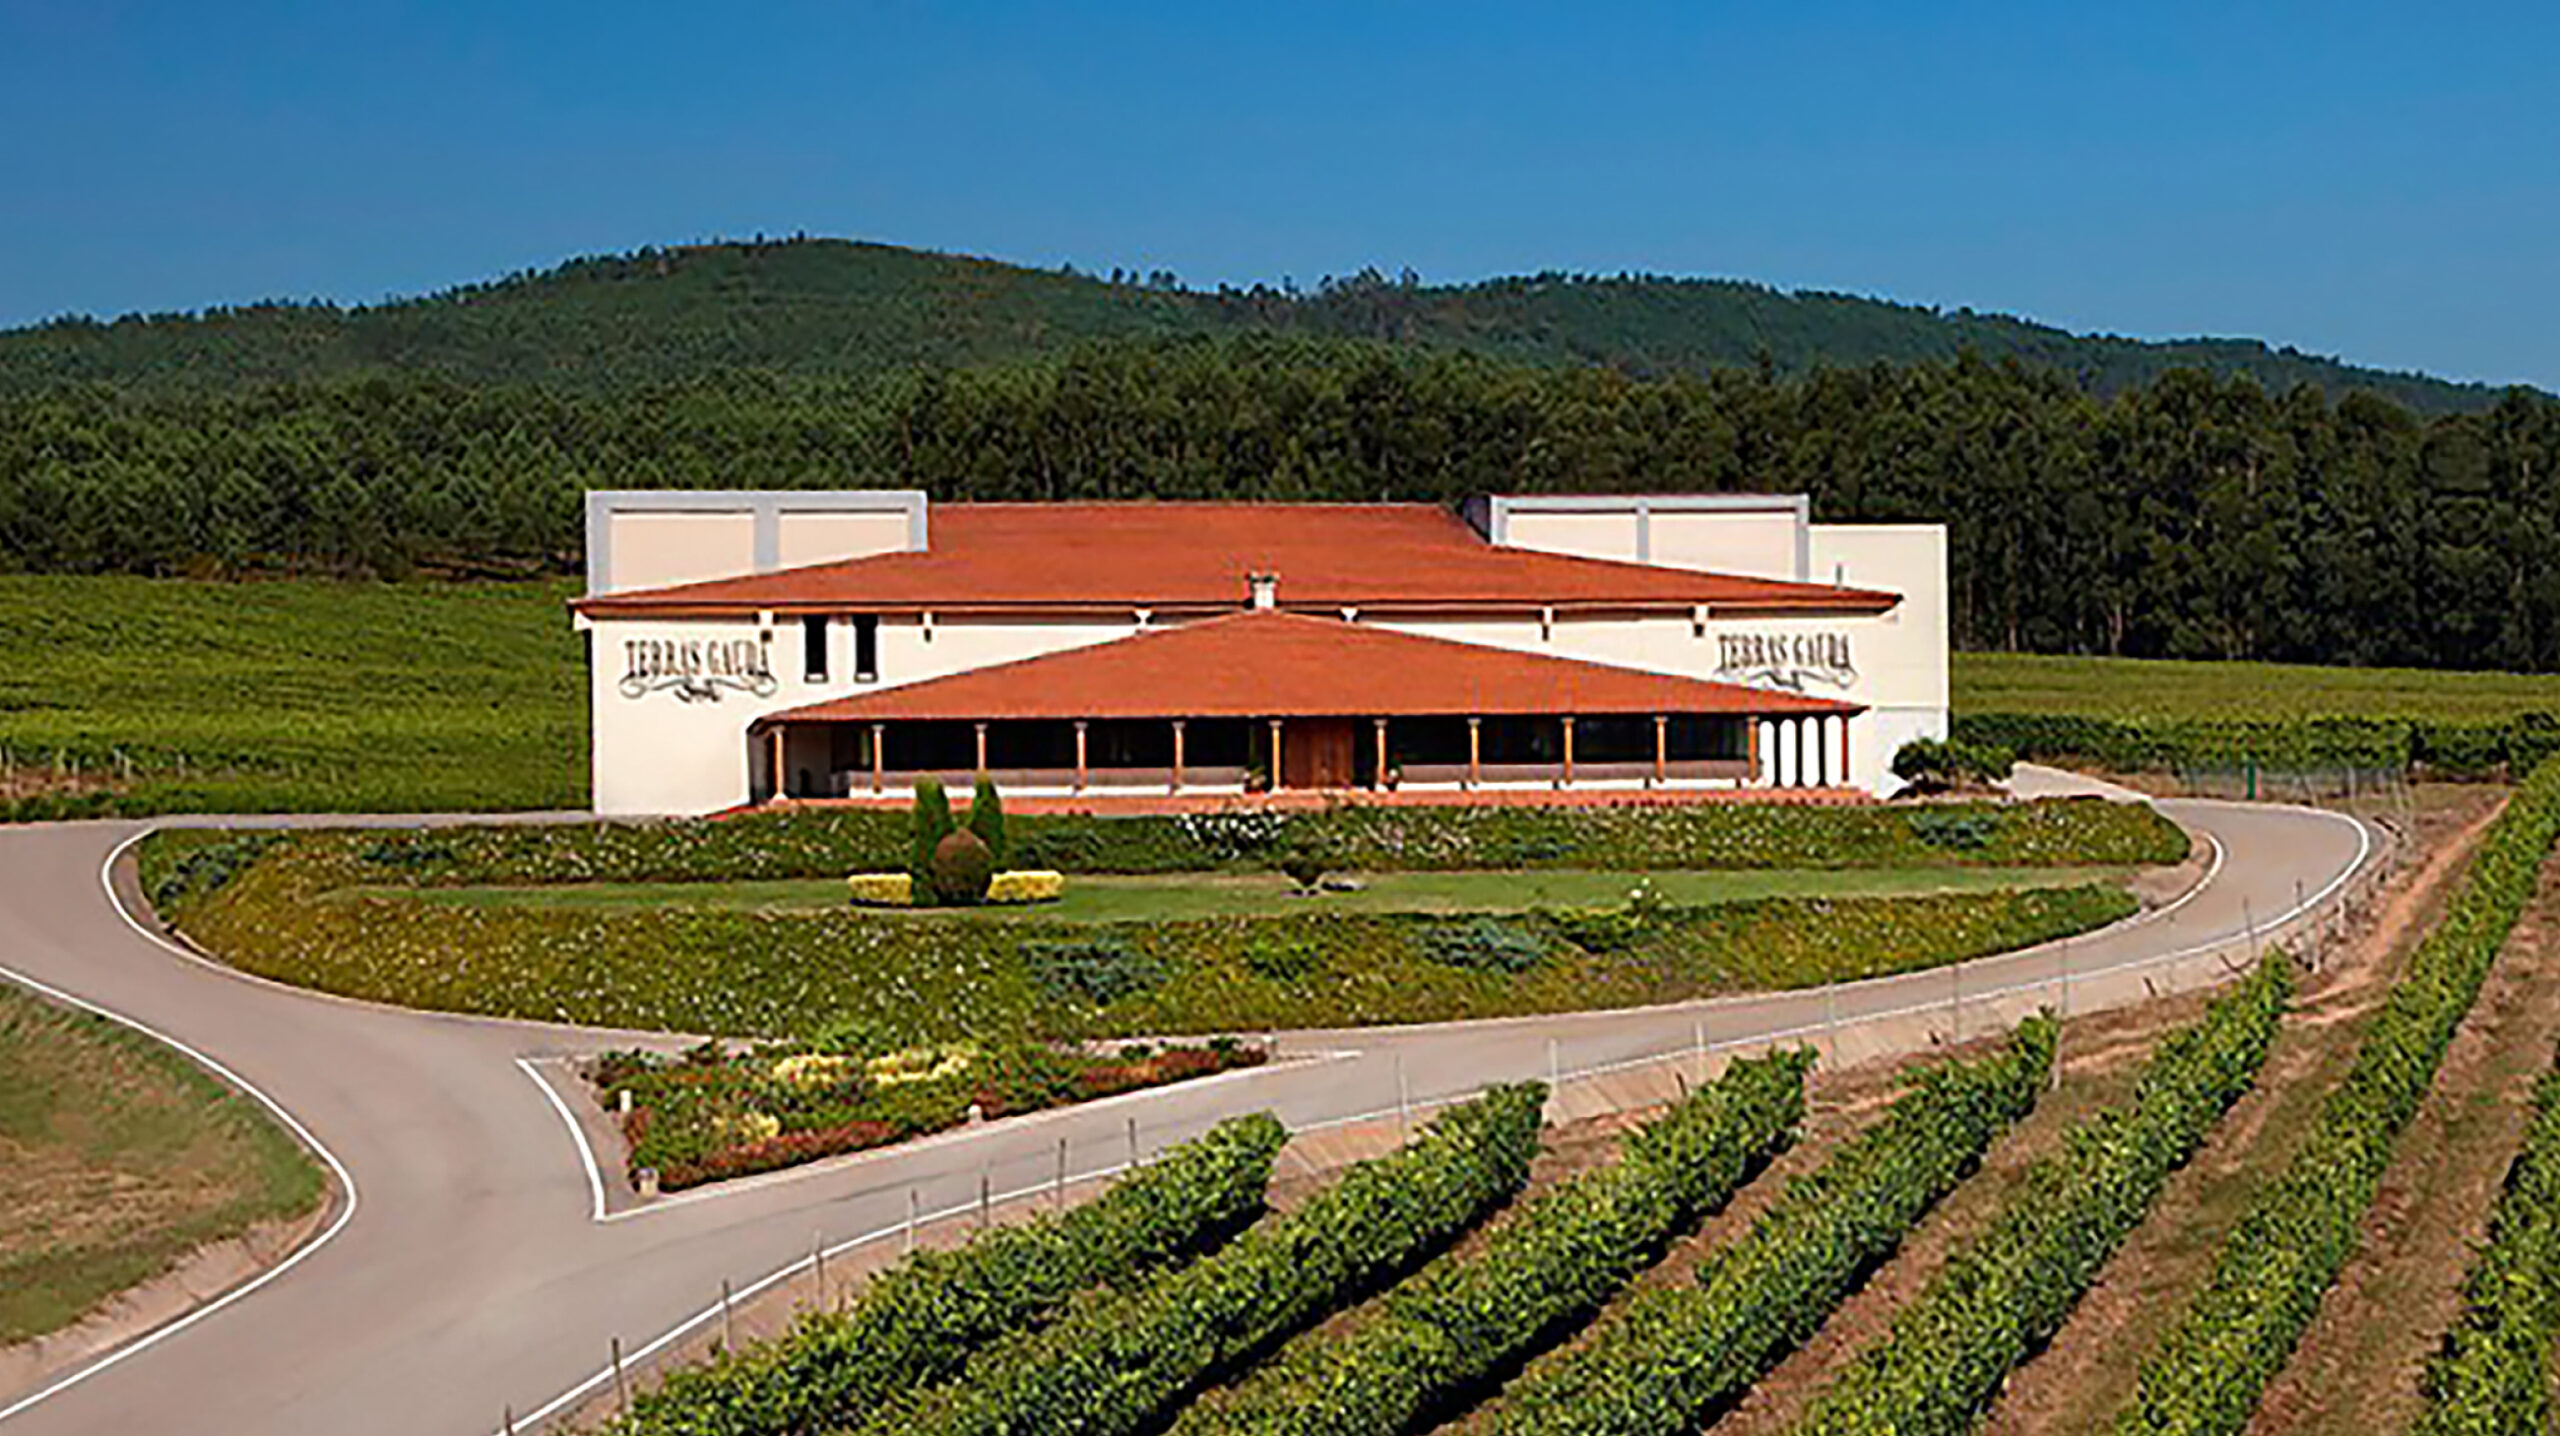 Main building of Terras Gauda winery situated amidst lush green vineyards with mountains in the background